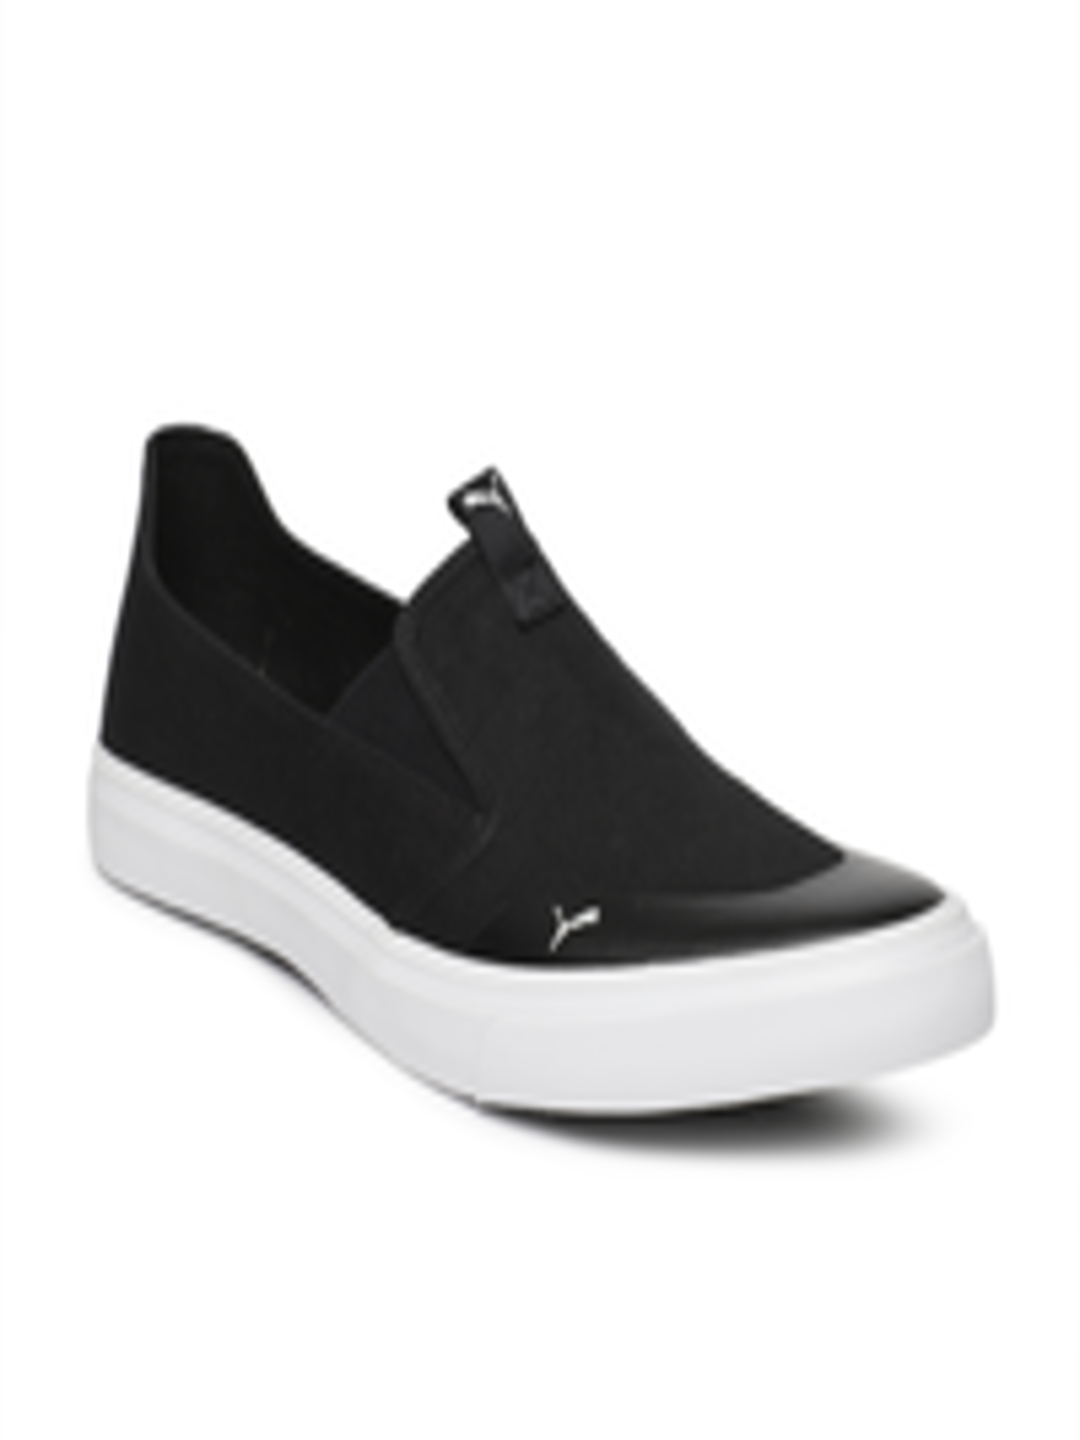 Buy Puma Men Black Lazy Knit Slip On Sneakers - Casual Shoes for Men ...